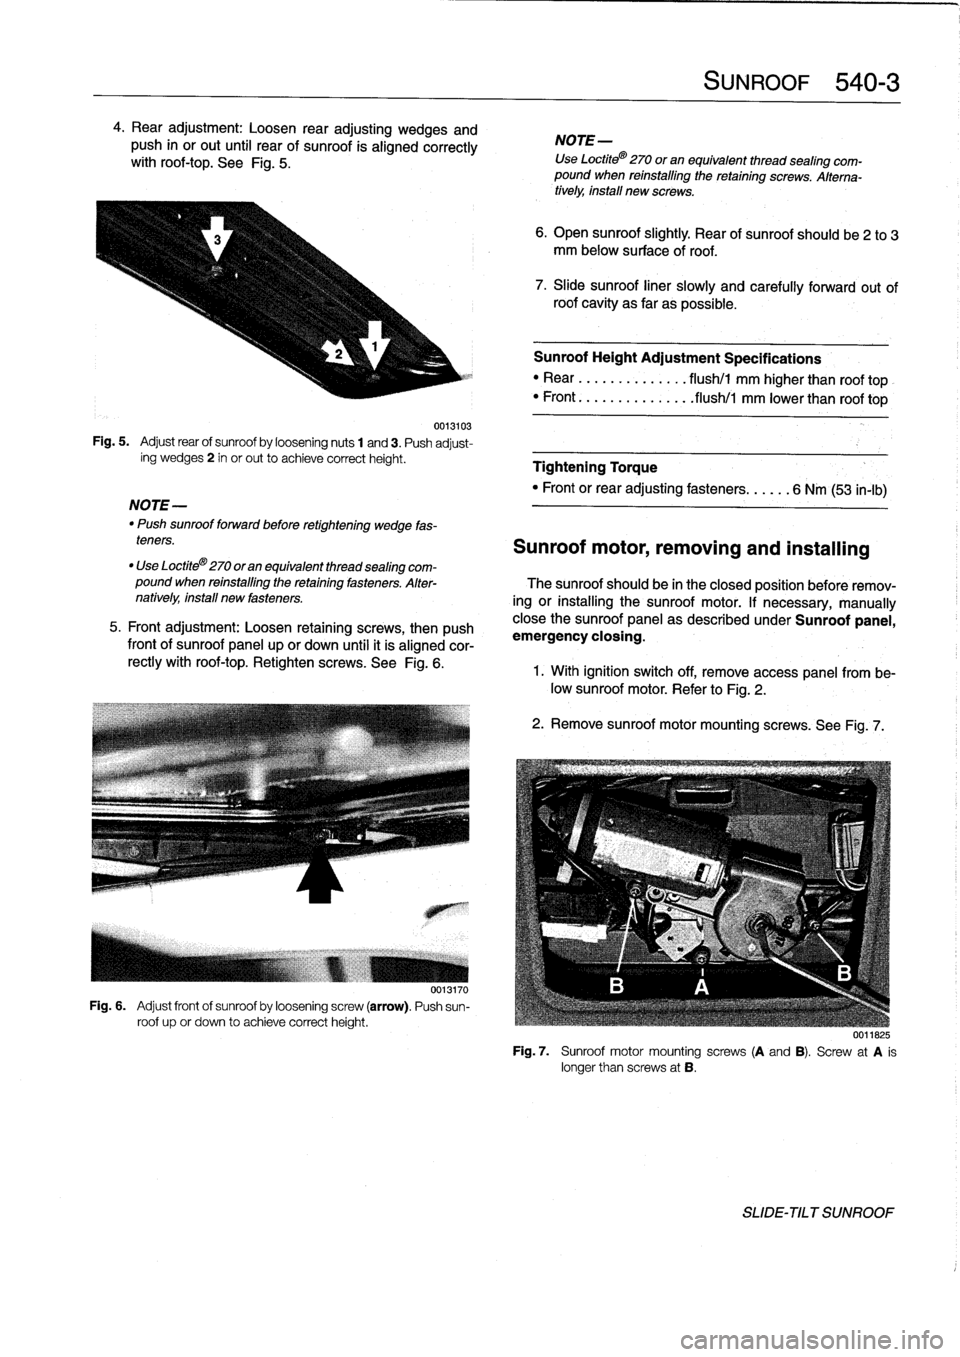 BMW 318i 1997 E36 Workshop Manual 4
.
Rear
adjustment
:
Loosen
rear
adjusting
wedges
and
push
in
or
out
until
rear
of
sunroof
is
aligned
correctly
withroof-top
.
See
Fig
.
5
.

0013103
Fig
.
5
.

	

Adjust
rear
of
sunroof
by
loosening